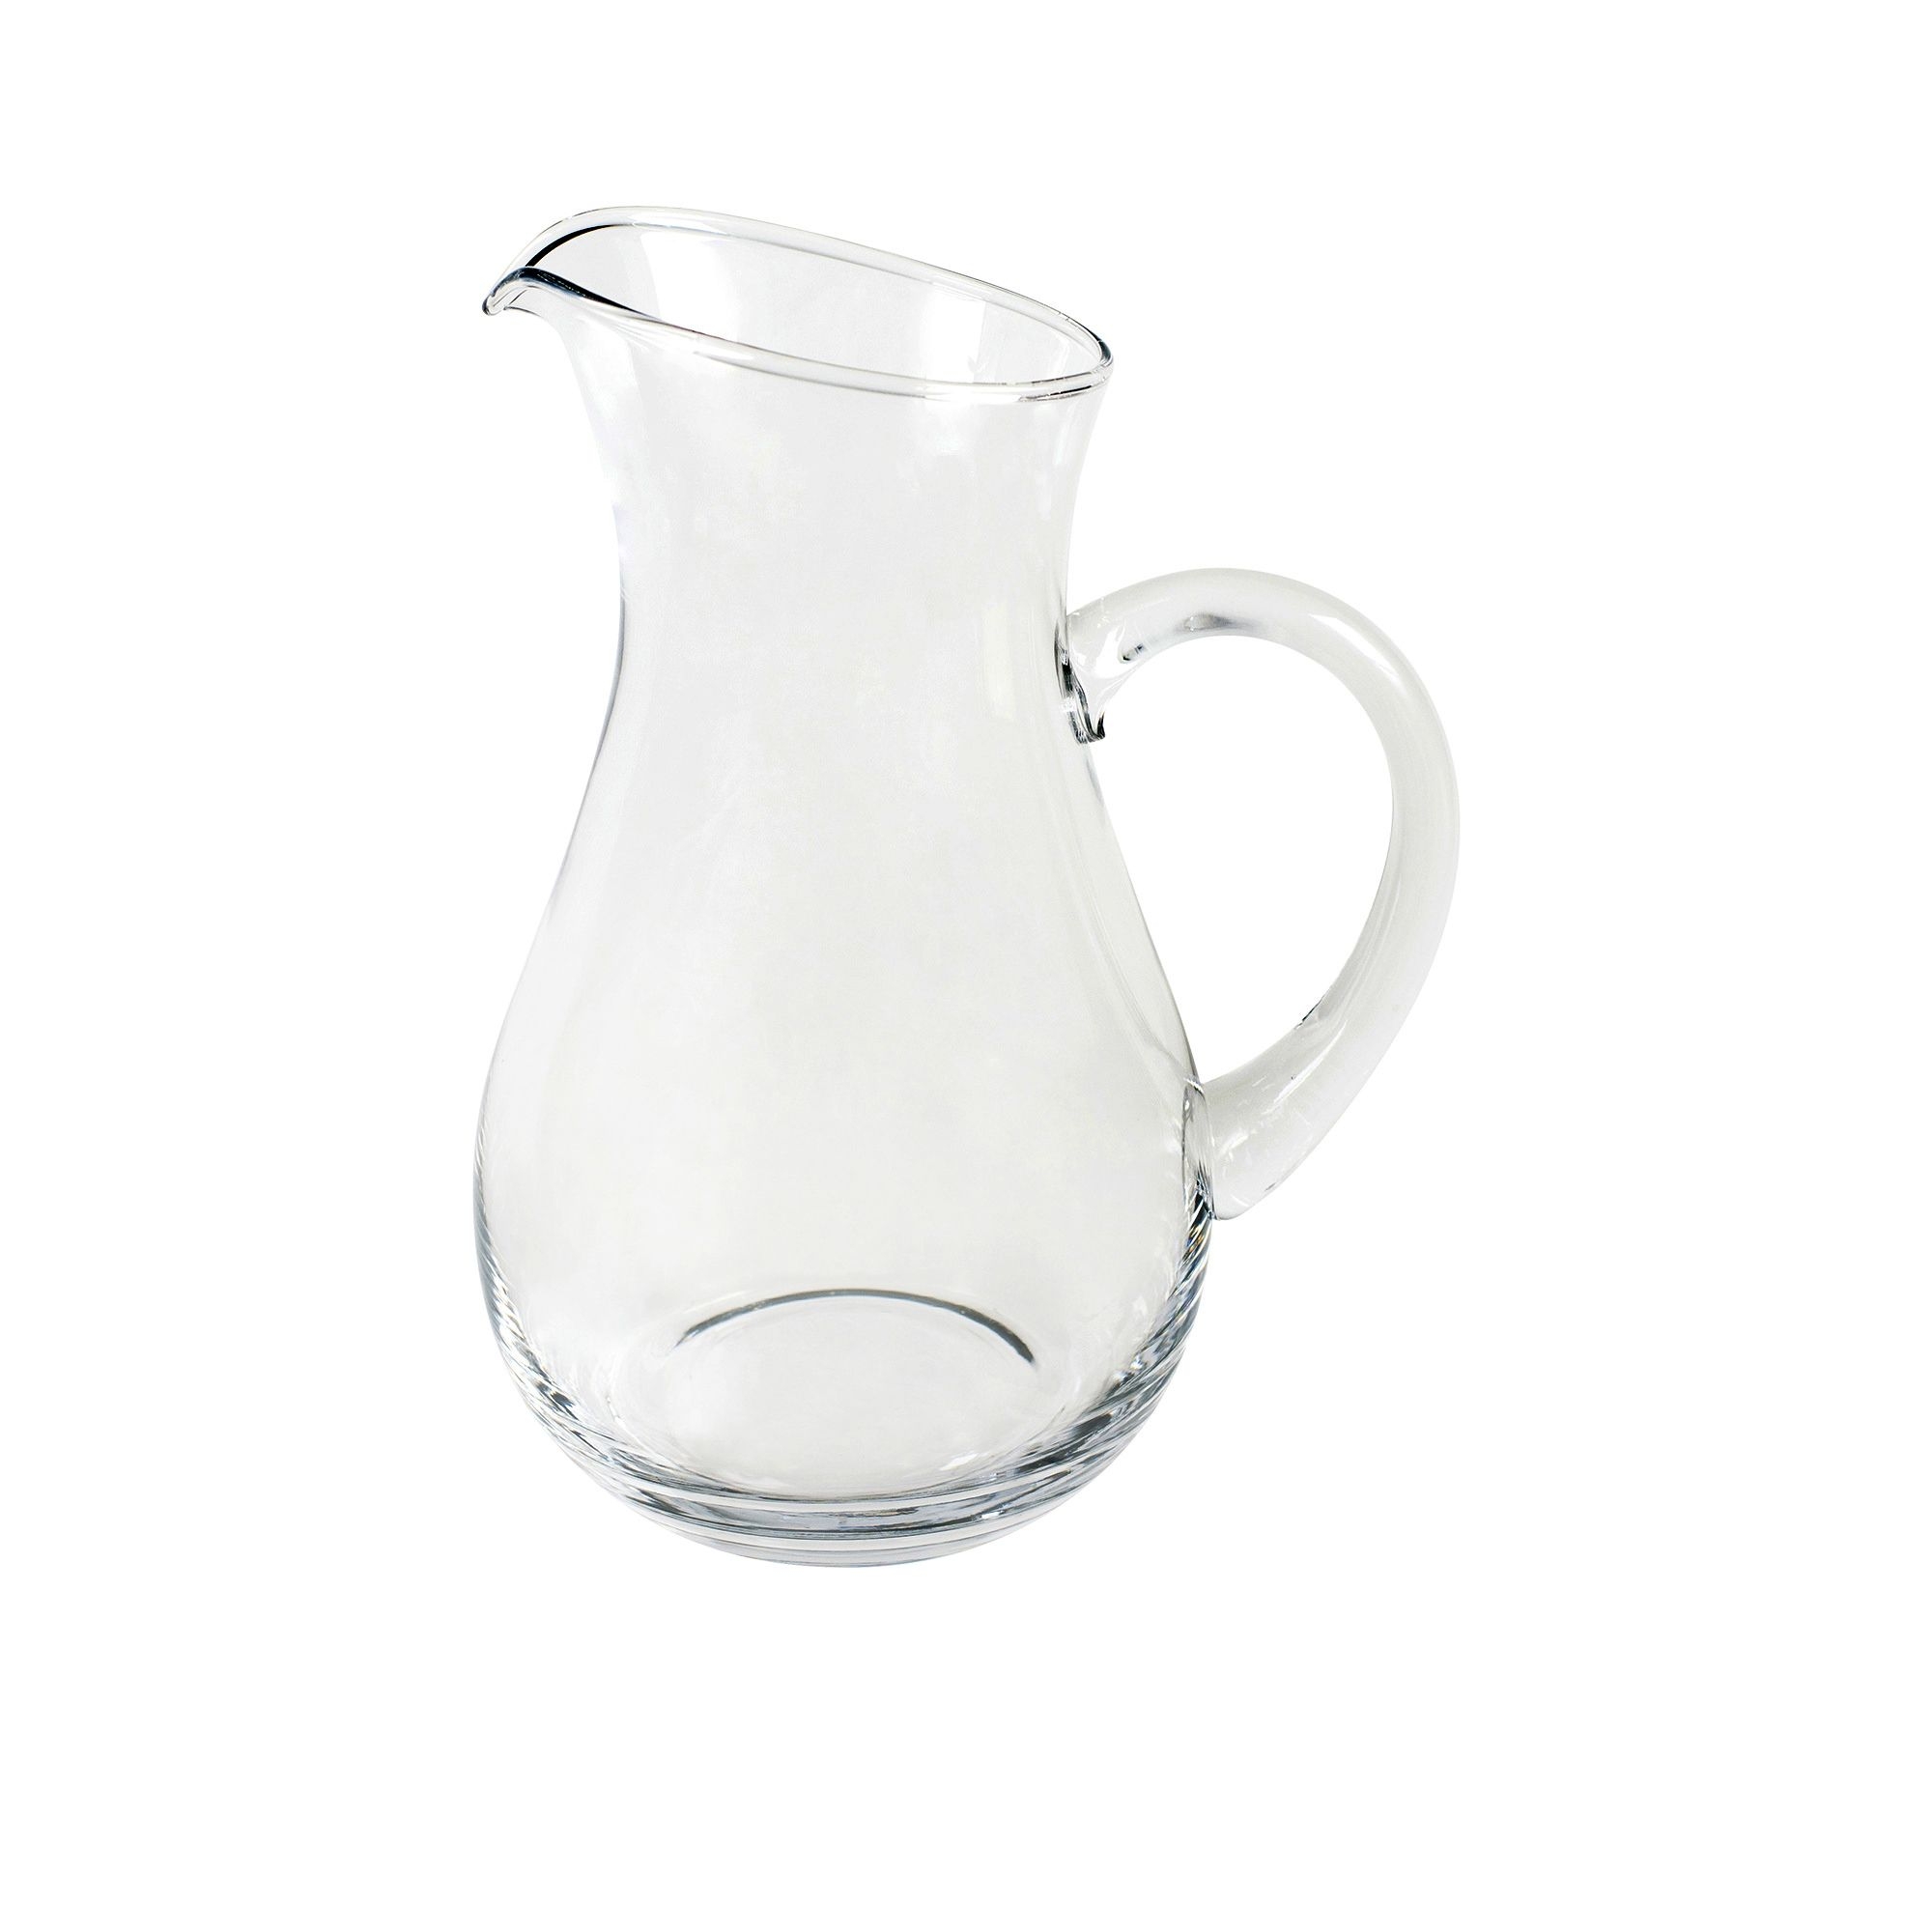 Wilkie Brothers Balmoral Water Pitcher 1.75L Image 1